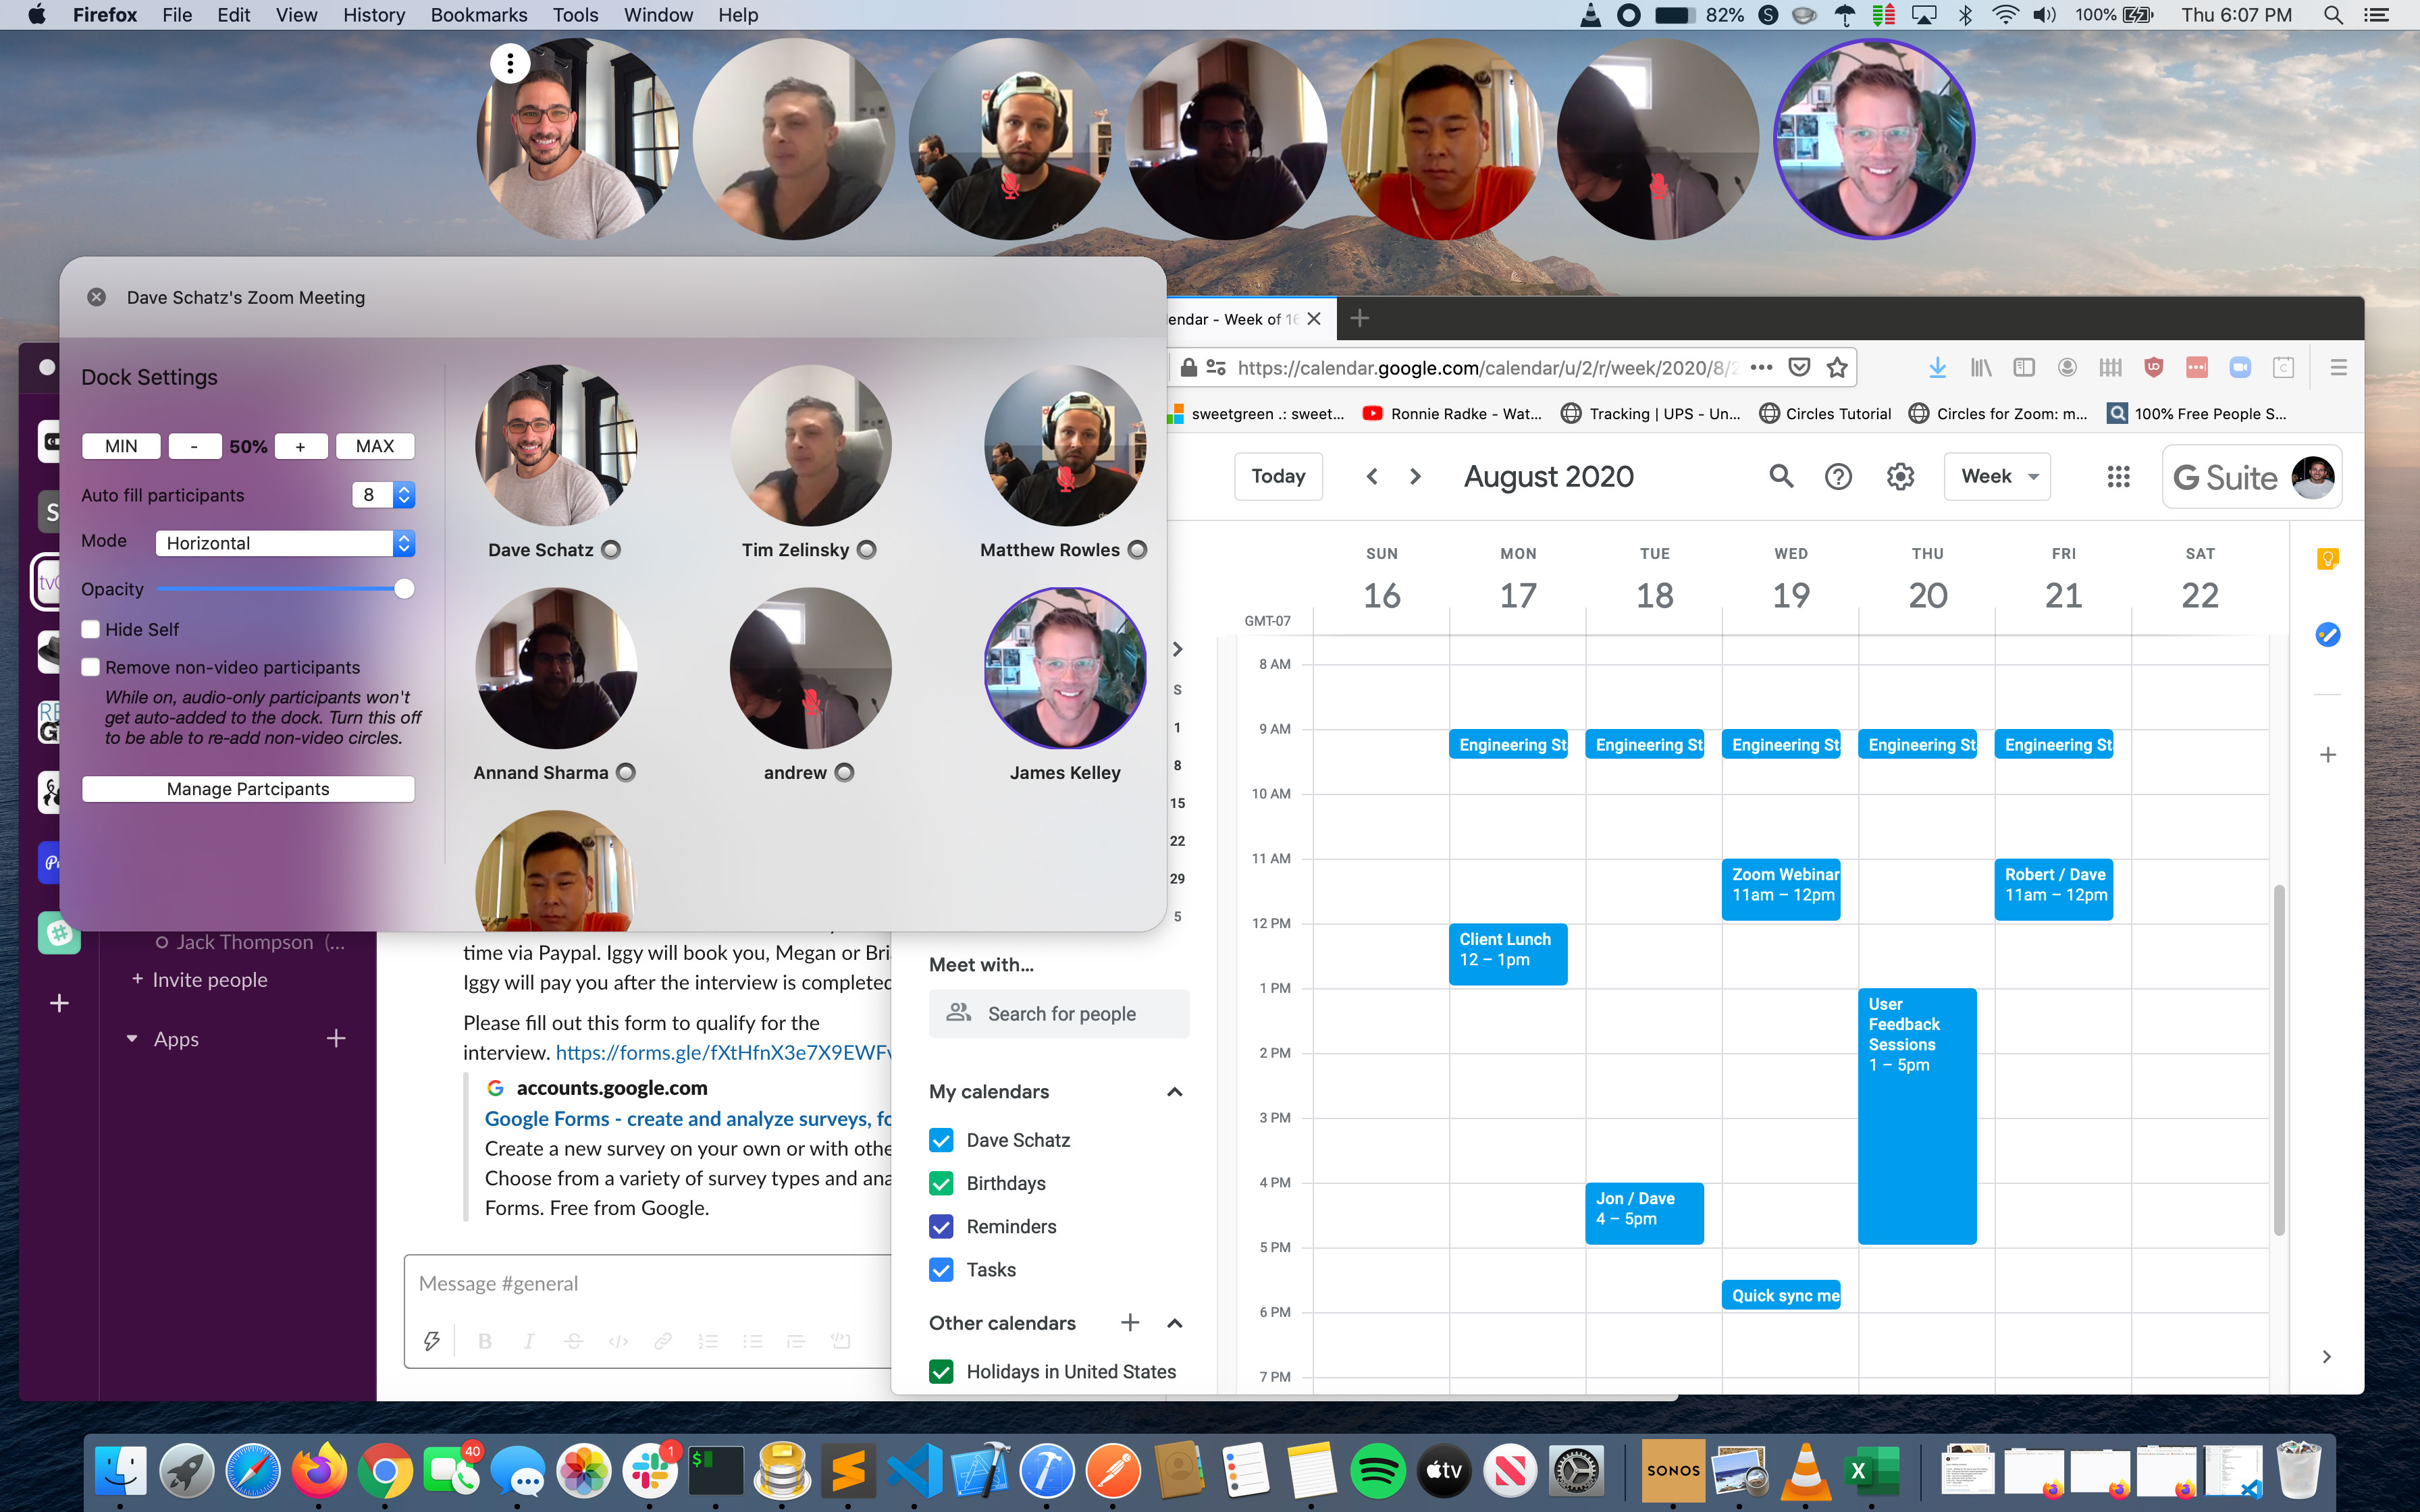 Get feedback from a vast remote working audience about Circles for Zoom